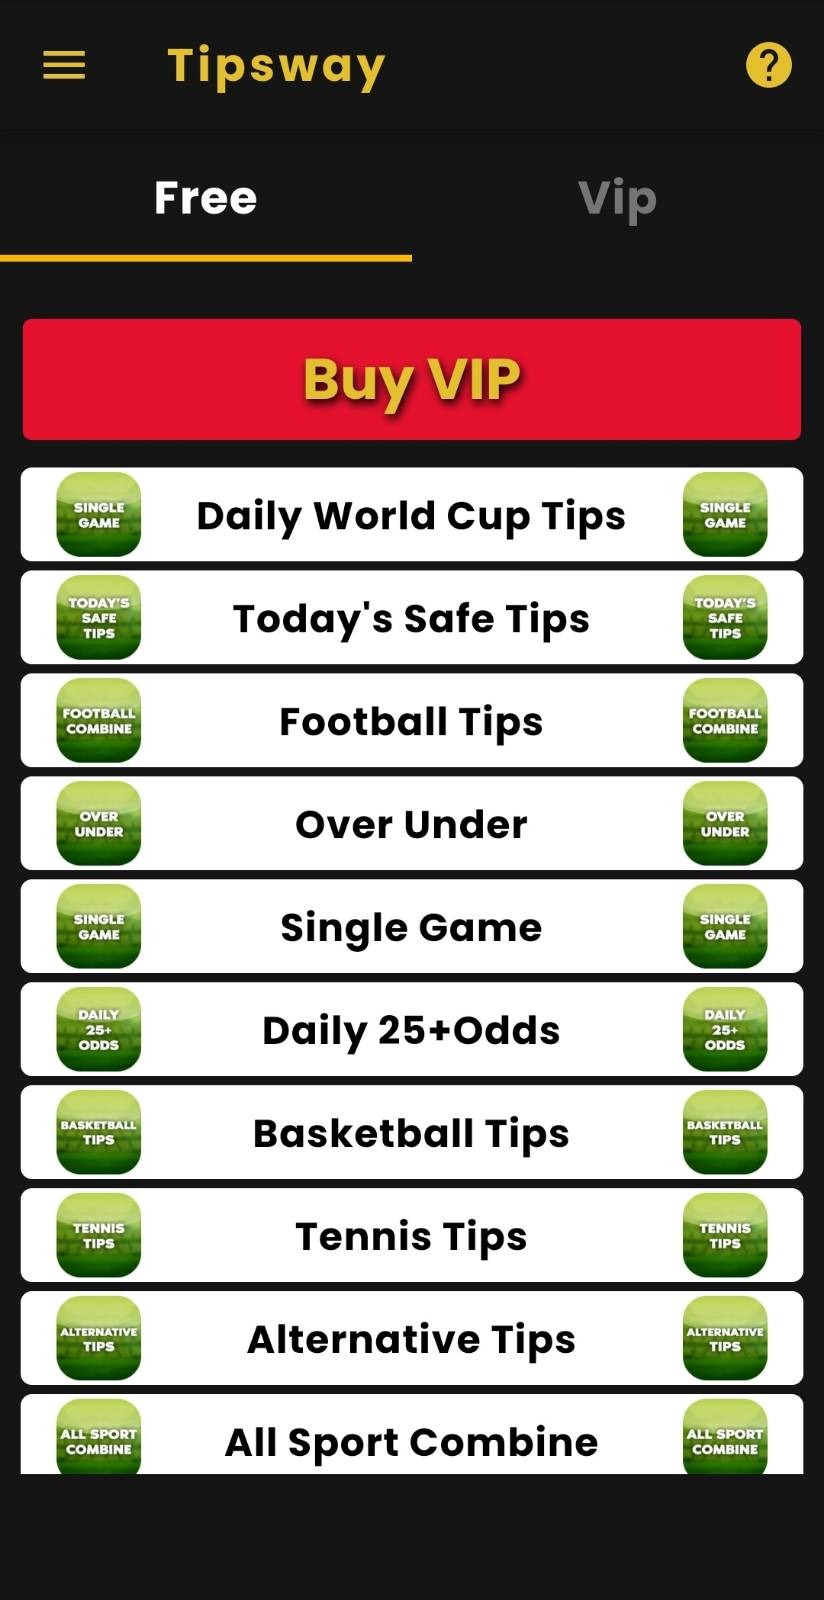 Download WIN-DRAW-WIN TIPS Free for Android - WIN-DRAW-WIN TIPS